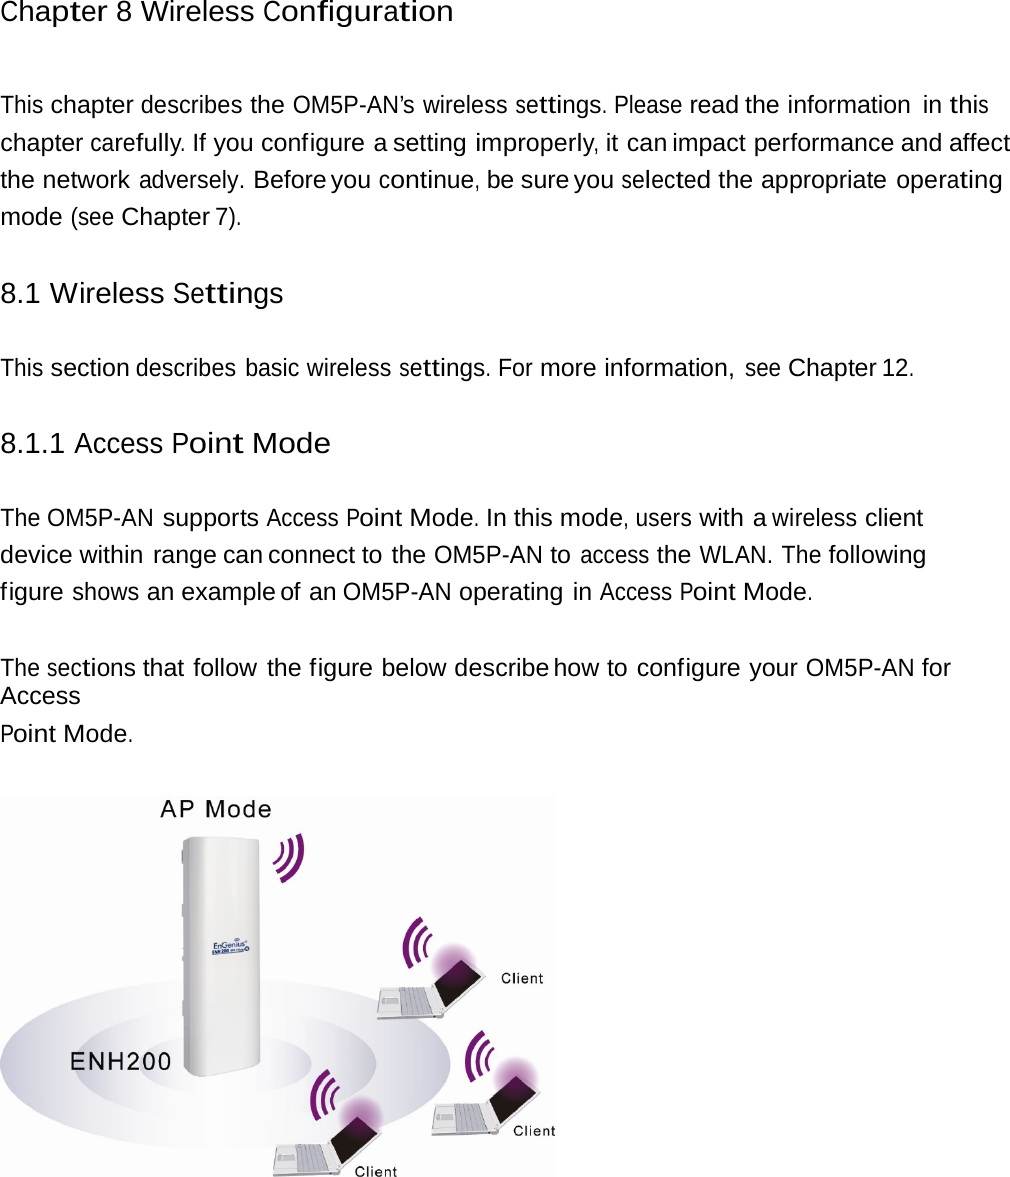 Chapter 8 Wireless Configuration This chapter describes the OM5P-AN’s wireless settings. Please read the information  in this chapter carefully. If you configure a setting improperly, it can impact performance and affect the network adversely. Before you continue, be sure you selected the appropriate operating mode (see Chapter 7). 8.1 Wireless Settings This section describes basic wireless settings. For more information, see Chapter 12. 8.1.1 Access Point Mode The OM5P-AN supports Access Point Mode. In this mode, users with a wireless client device within range can connect to the OM5P-AN to access the WLAN. The following figure shows an example of an OM5P-AN operating in Access Point Mode. The sections that follow the figure below describe how  to  configure  your OM5P-AN for Access Point Mode.  